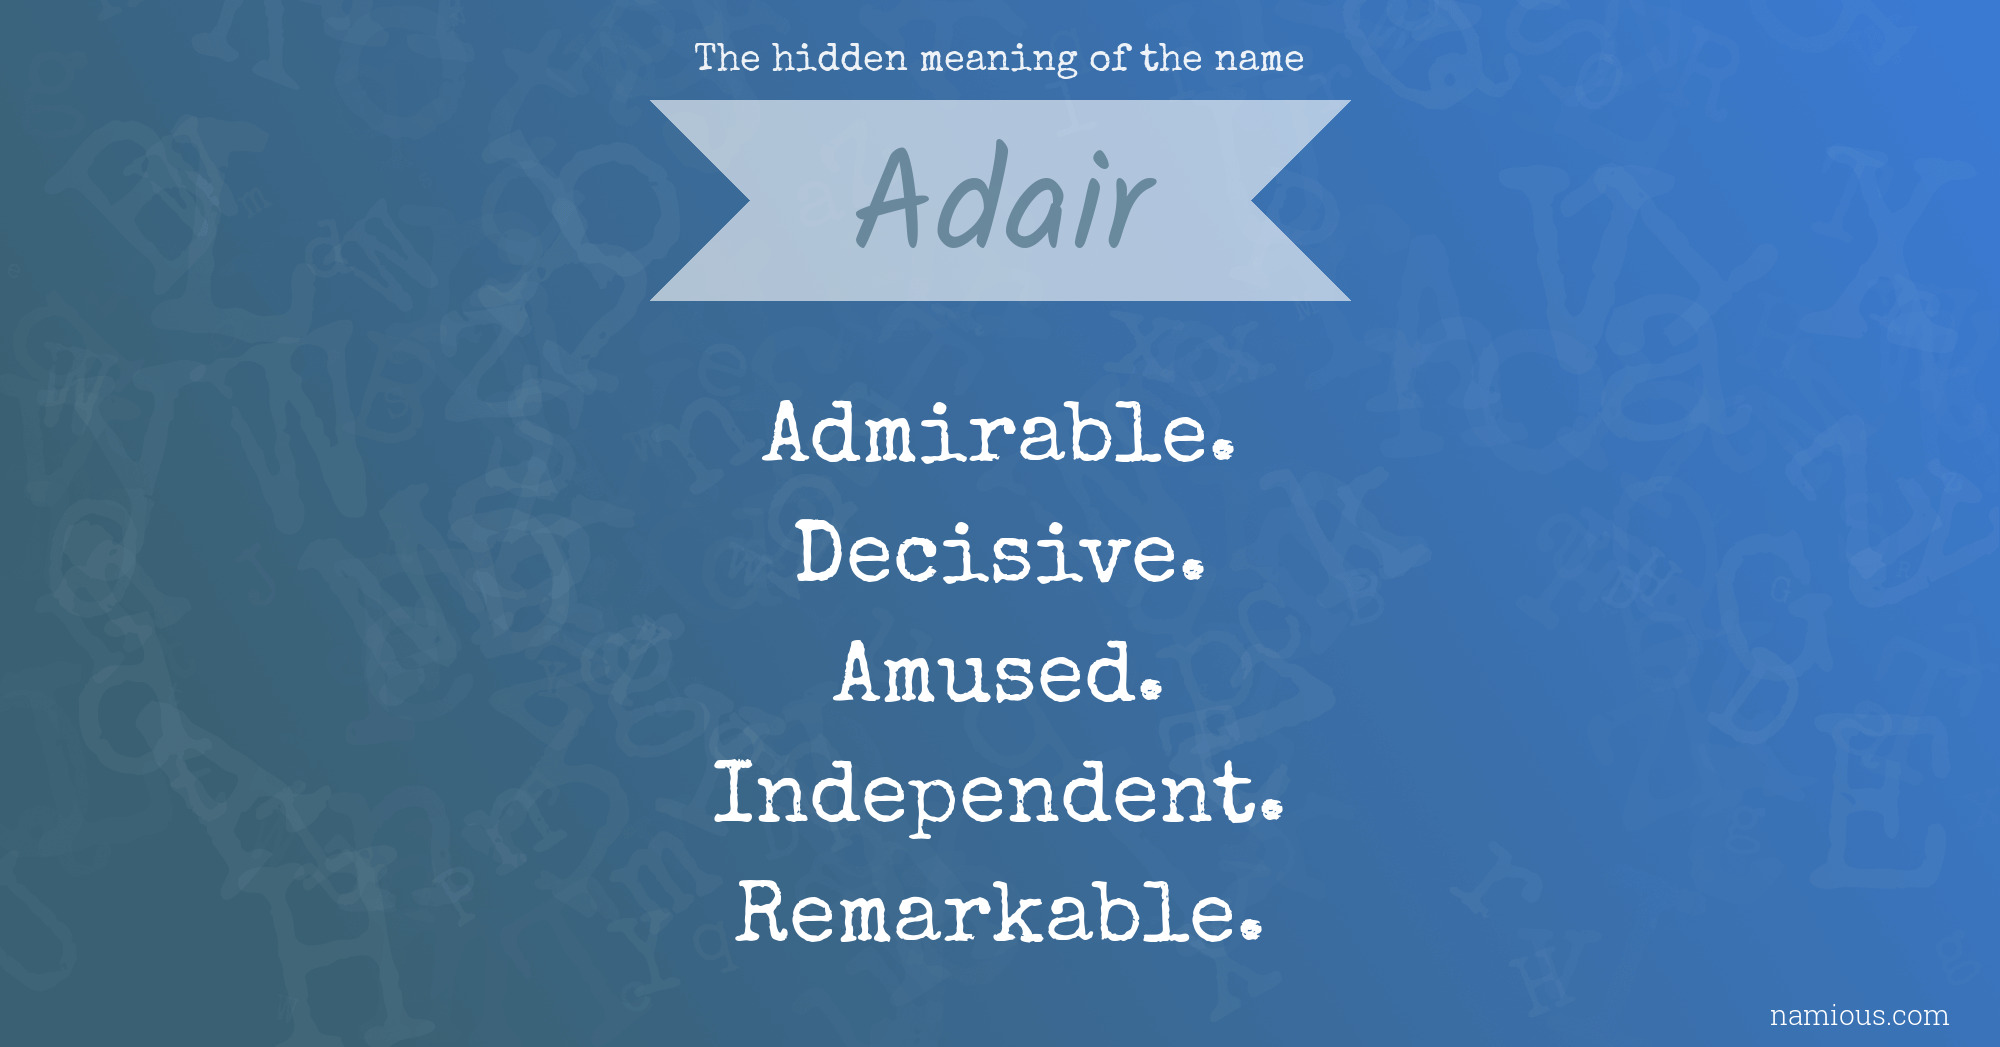 The hidden meaning of the name Adair